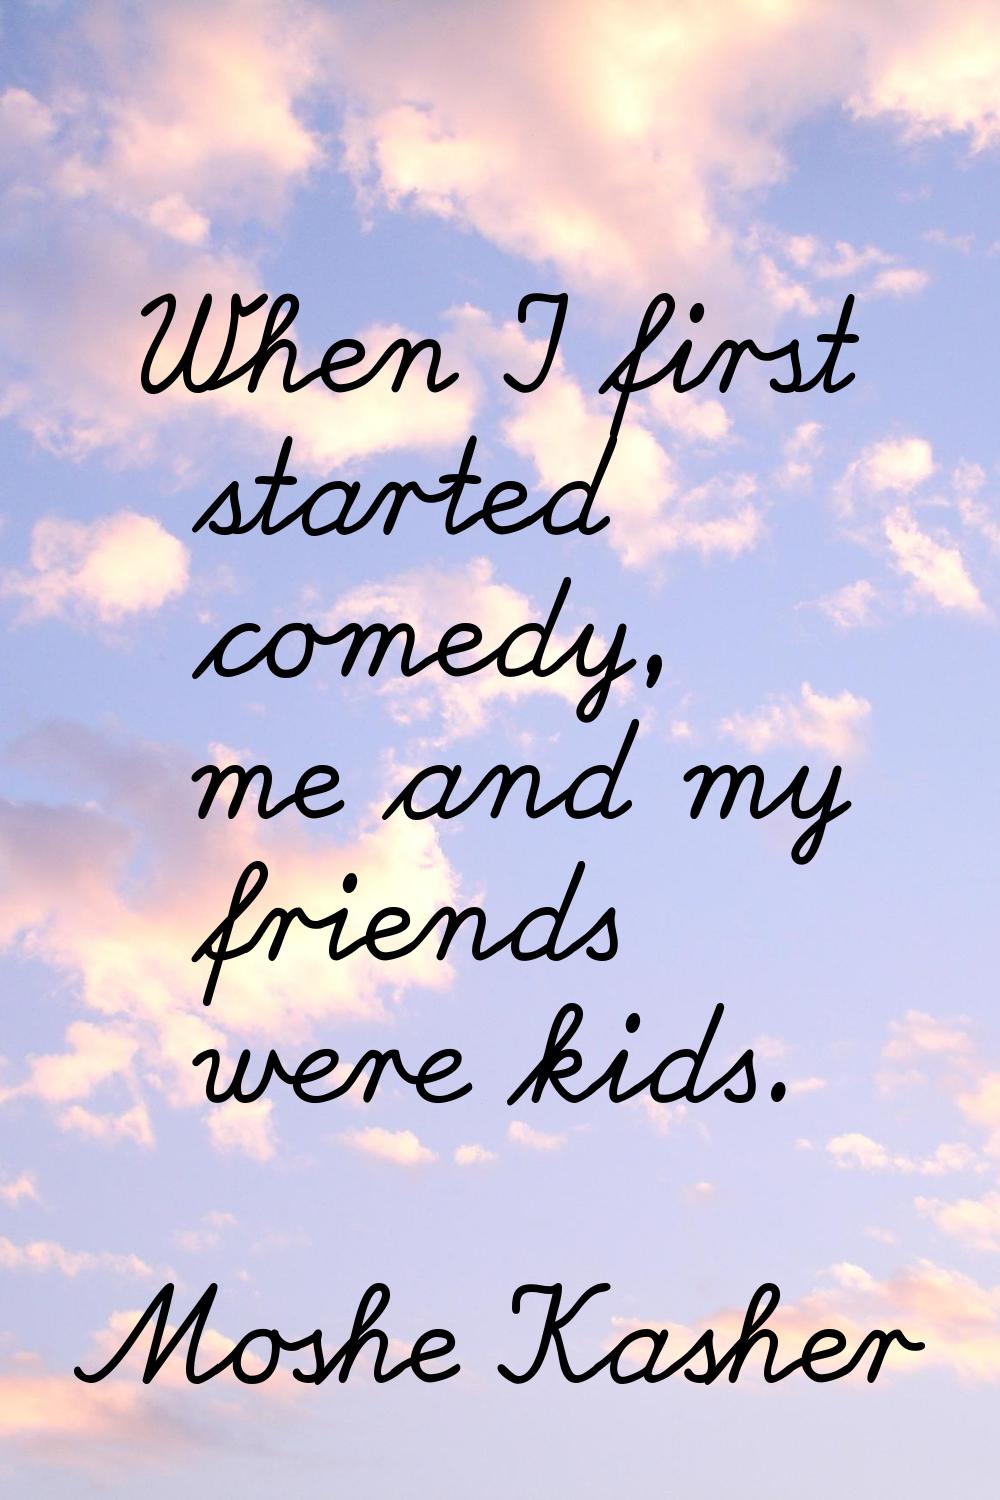 When I first started comedy, me and my friends were kids.